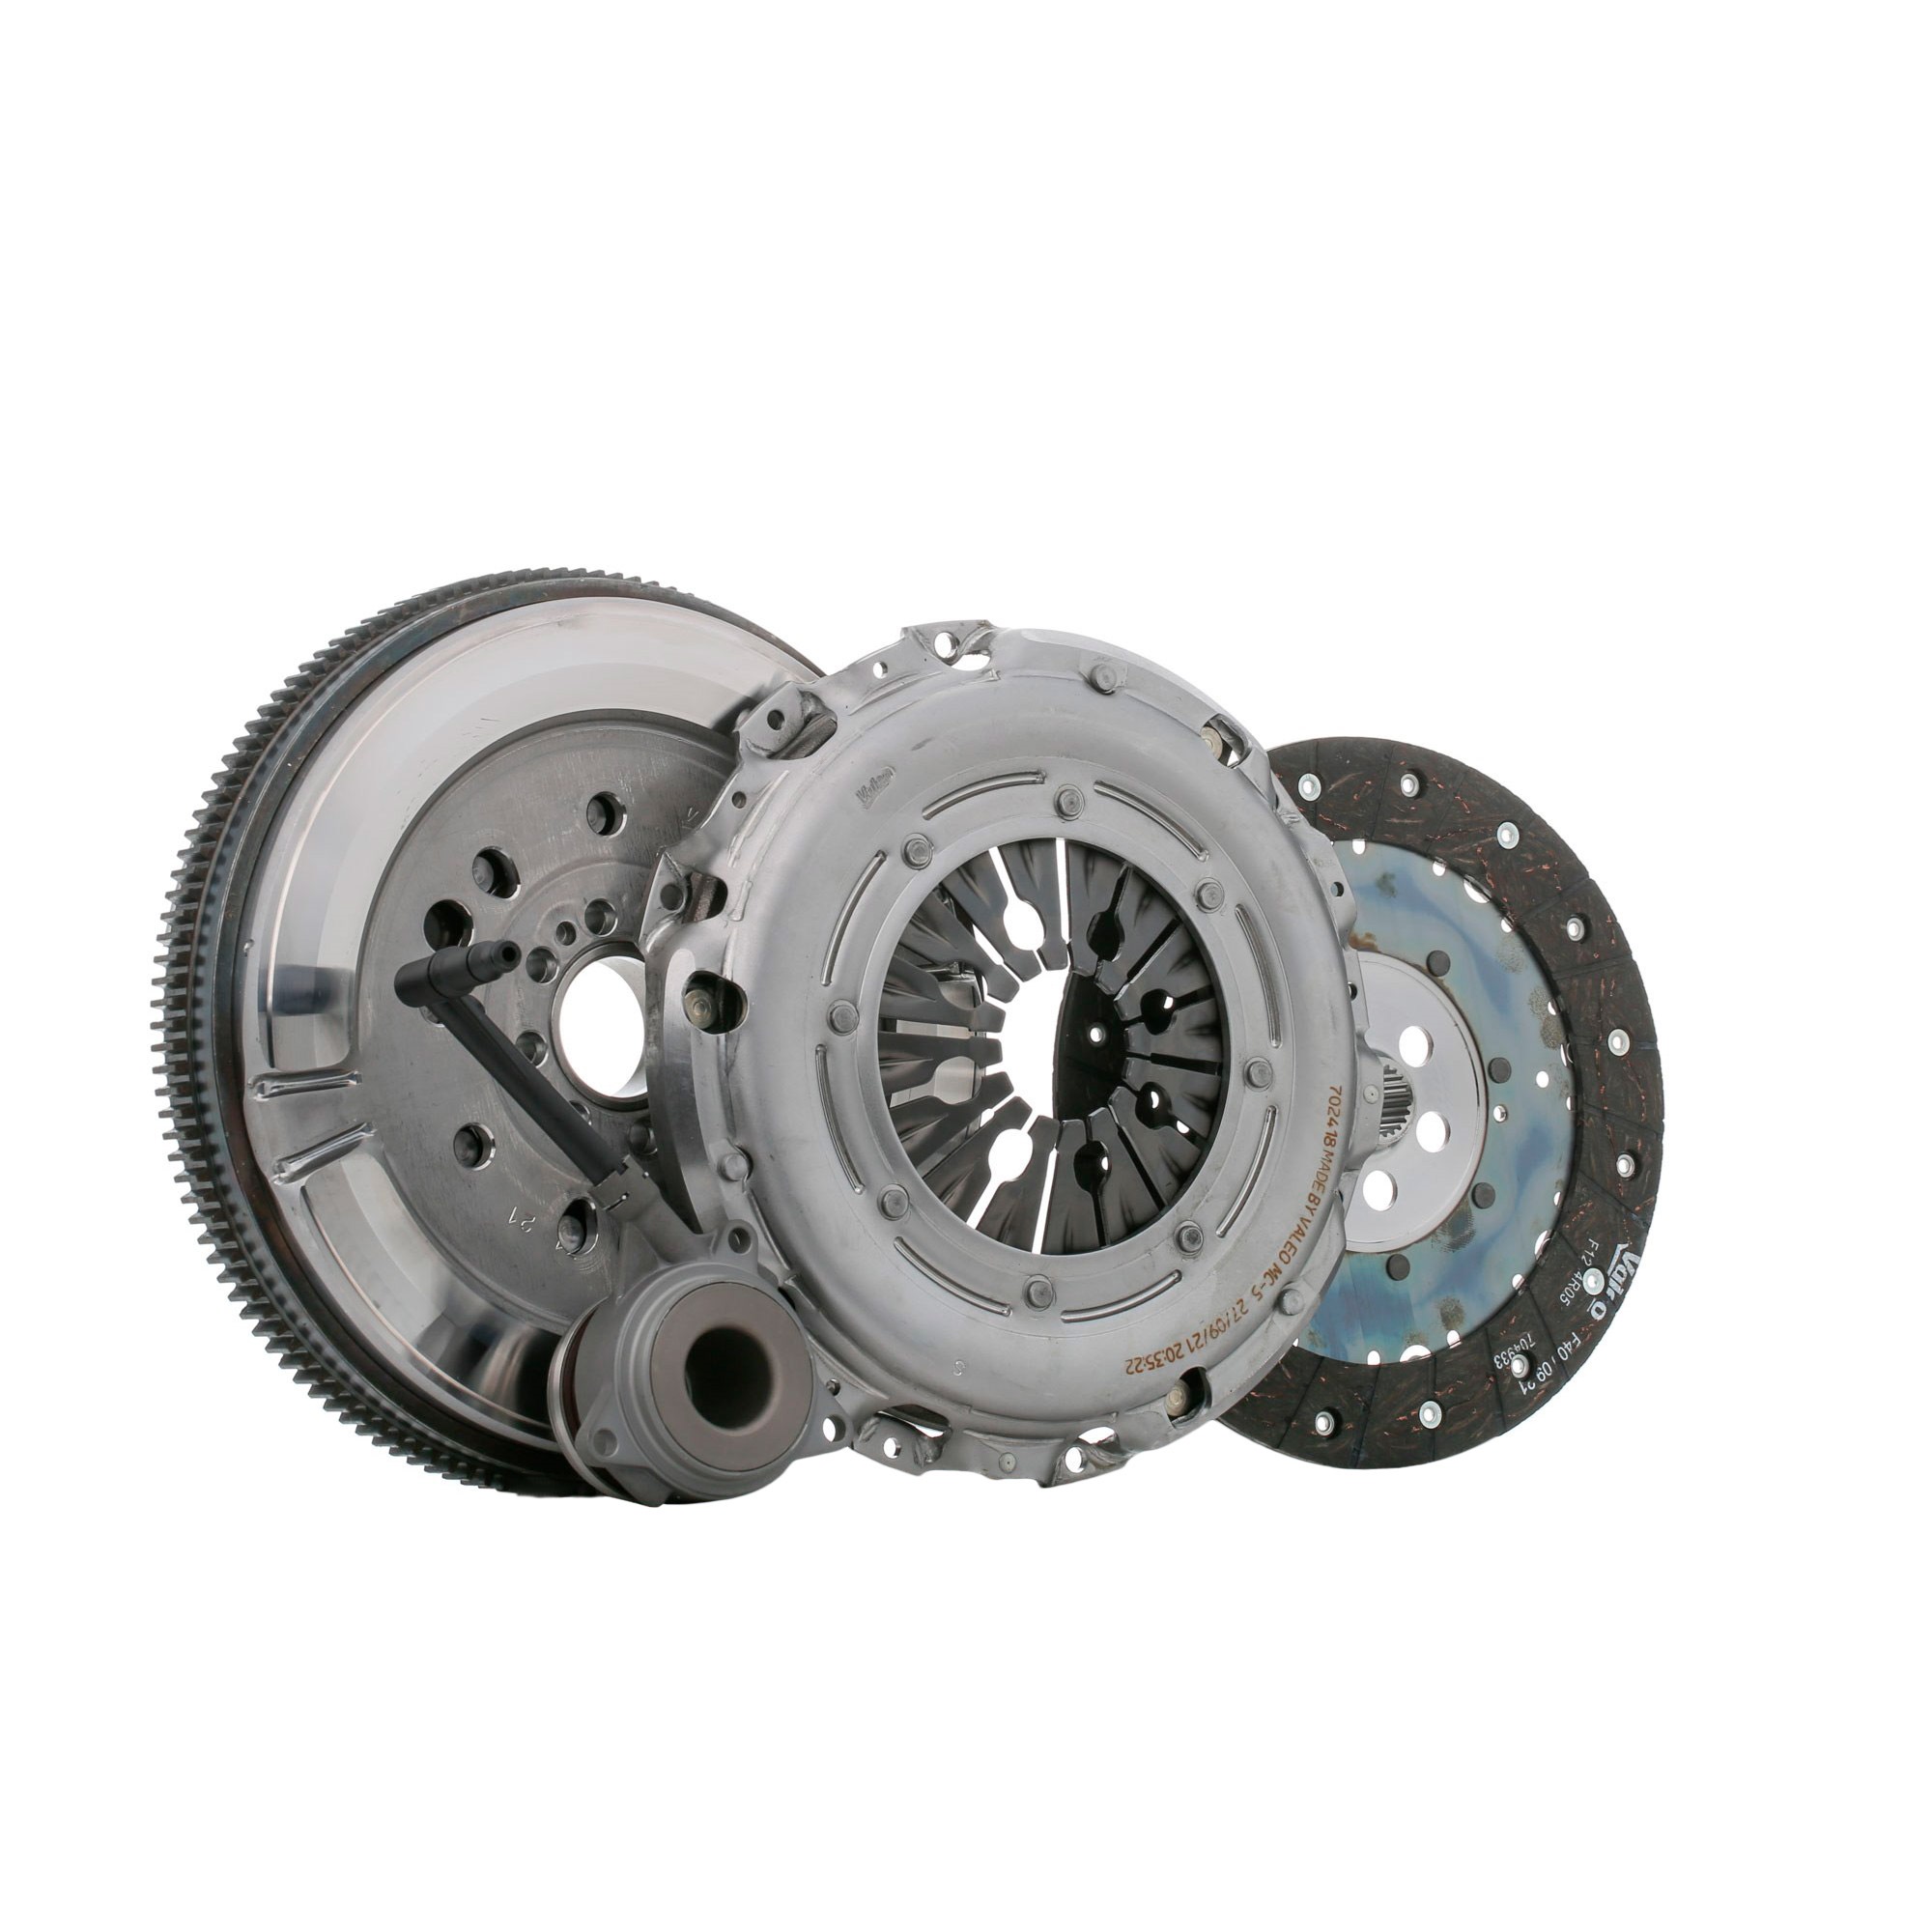 VALEO FULLPACK DMF (CSC) 837361 Clutch kit with dual-mass flywheel, with central slave cylinder, with screw set, with lock screw set, 240mm